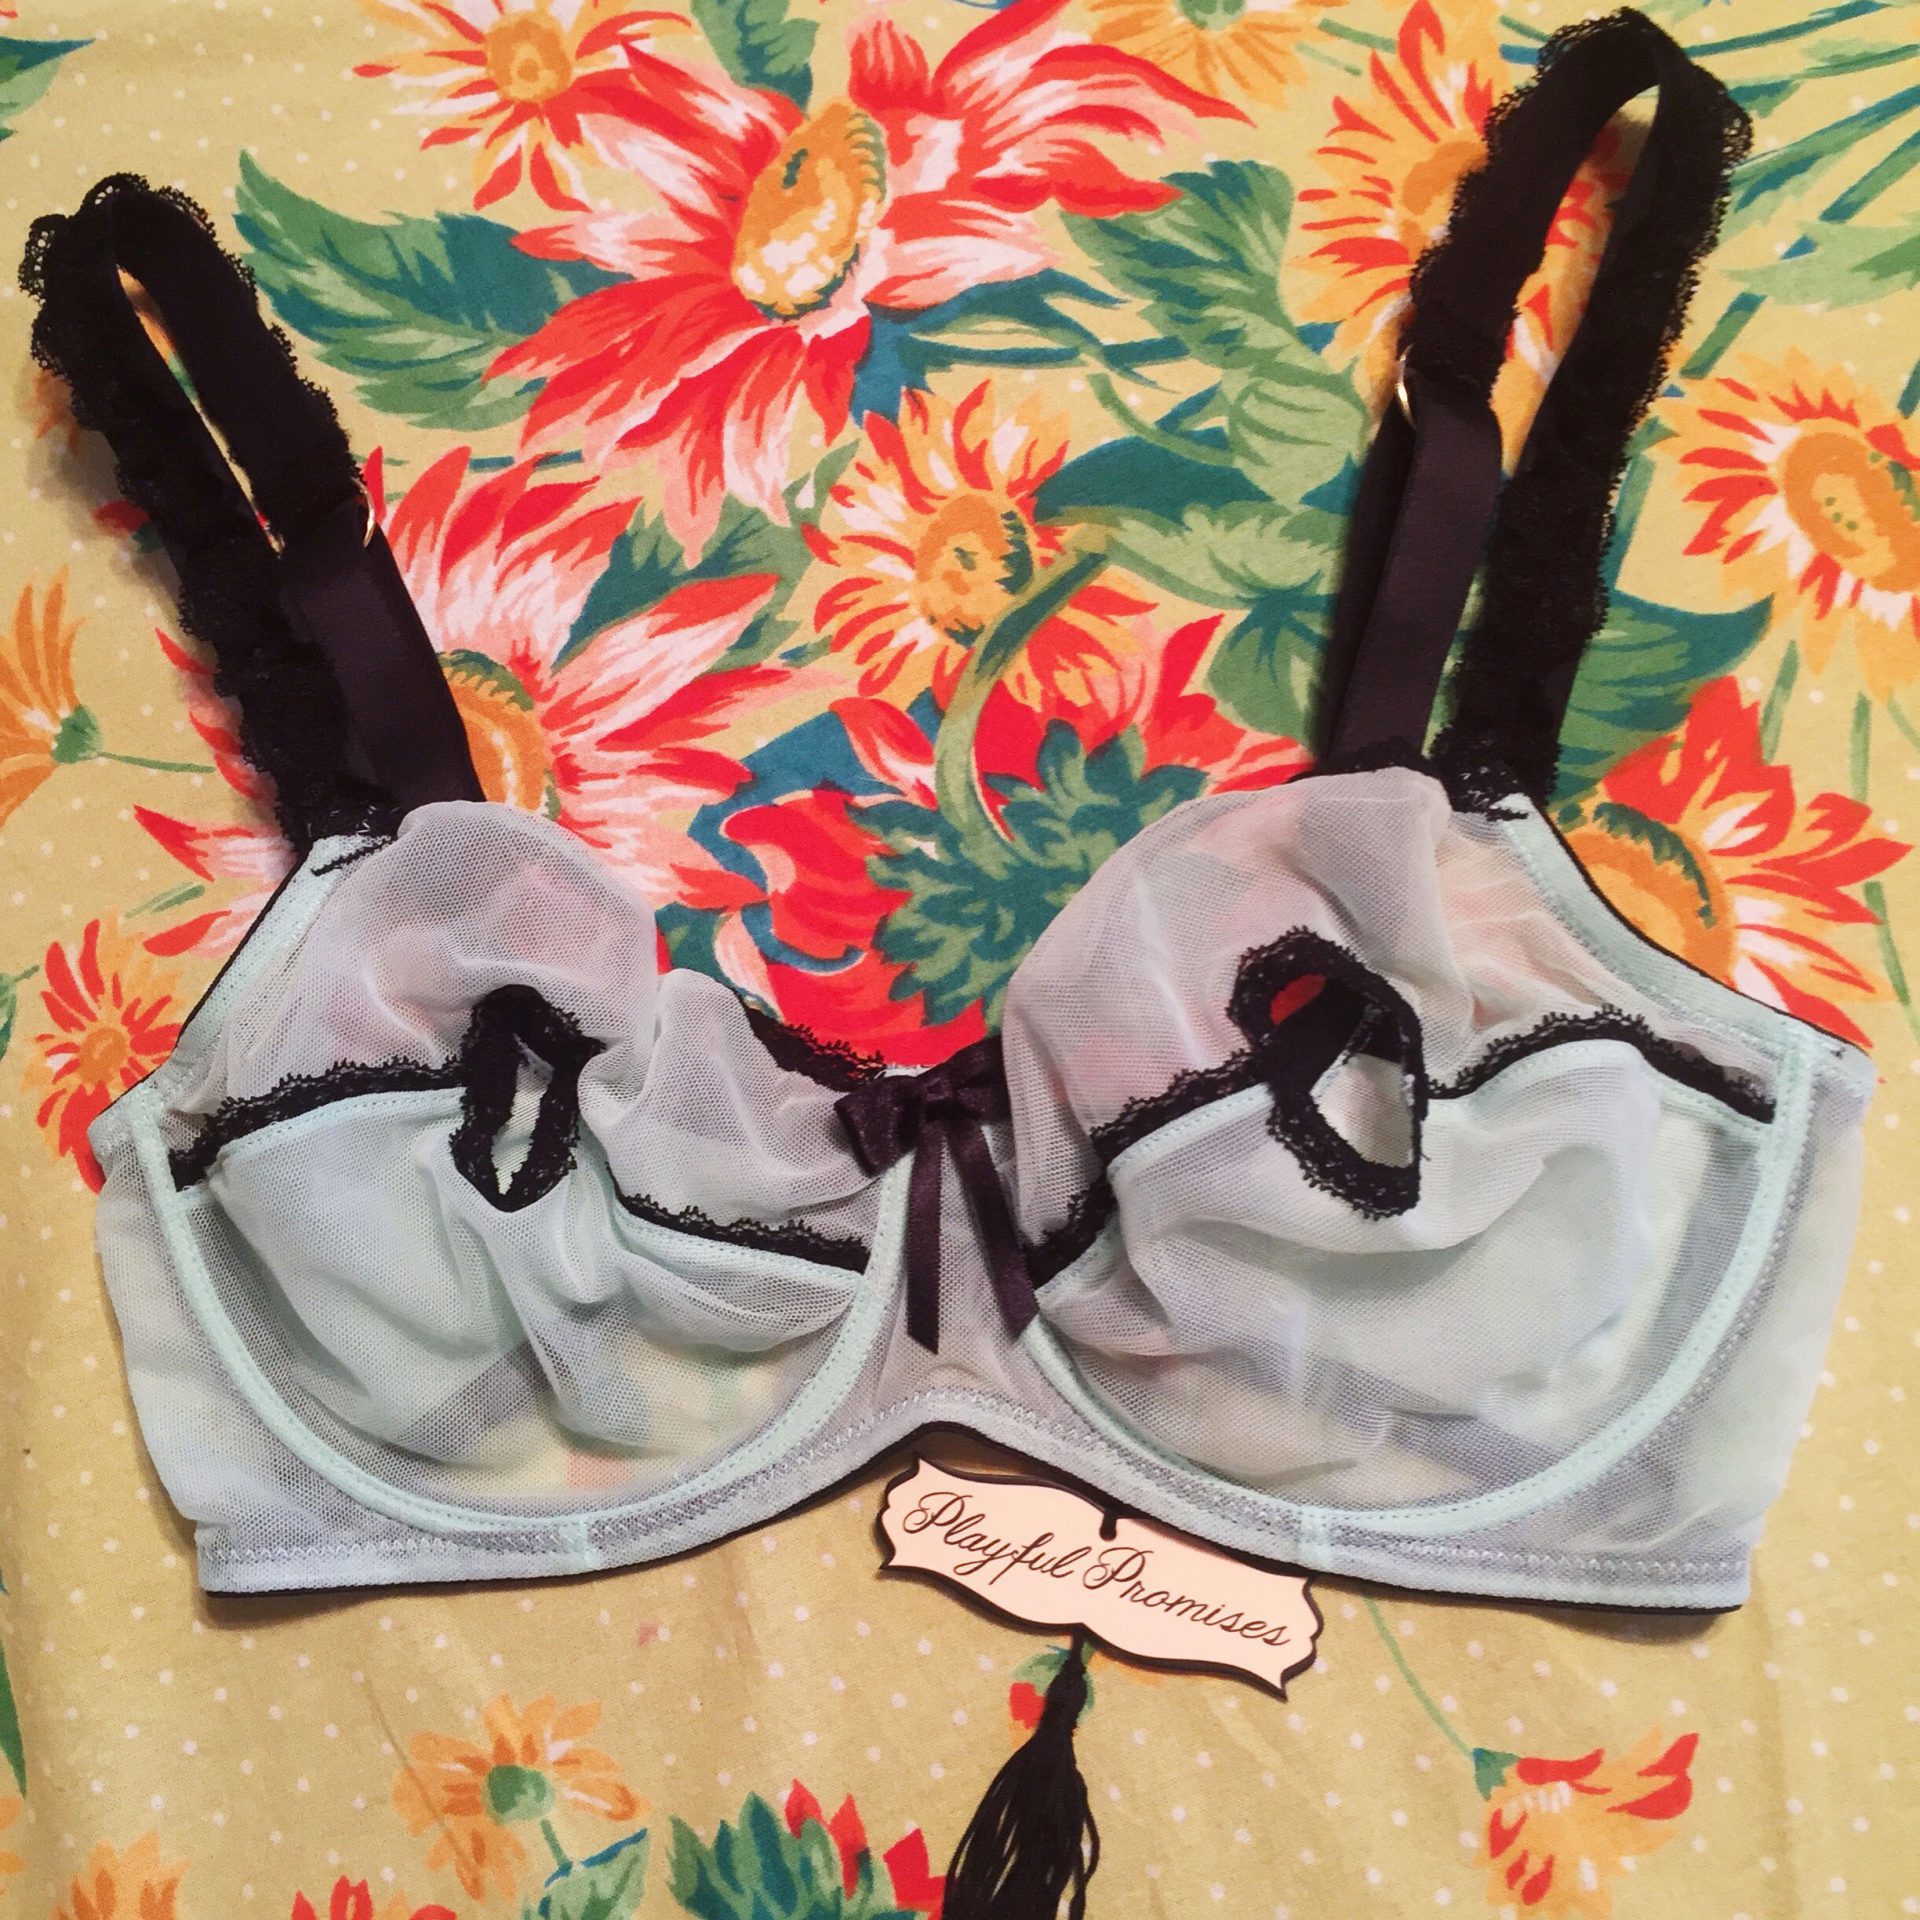 Peek-a-Boo Bras: Peep Show Lingerie Reveals the Essentials, Obscures the  Rest